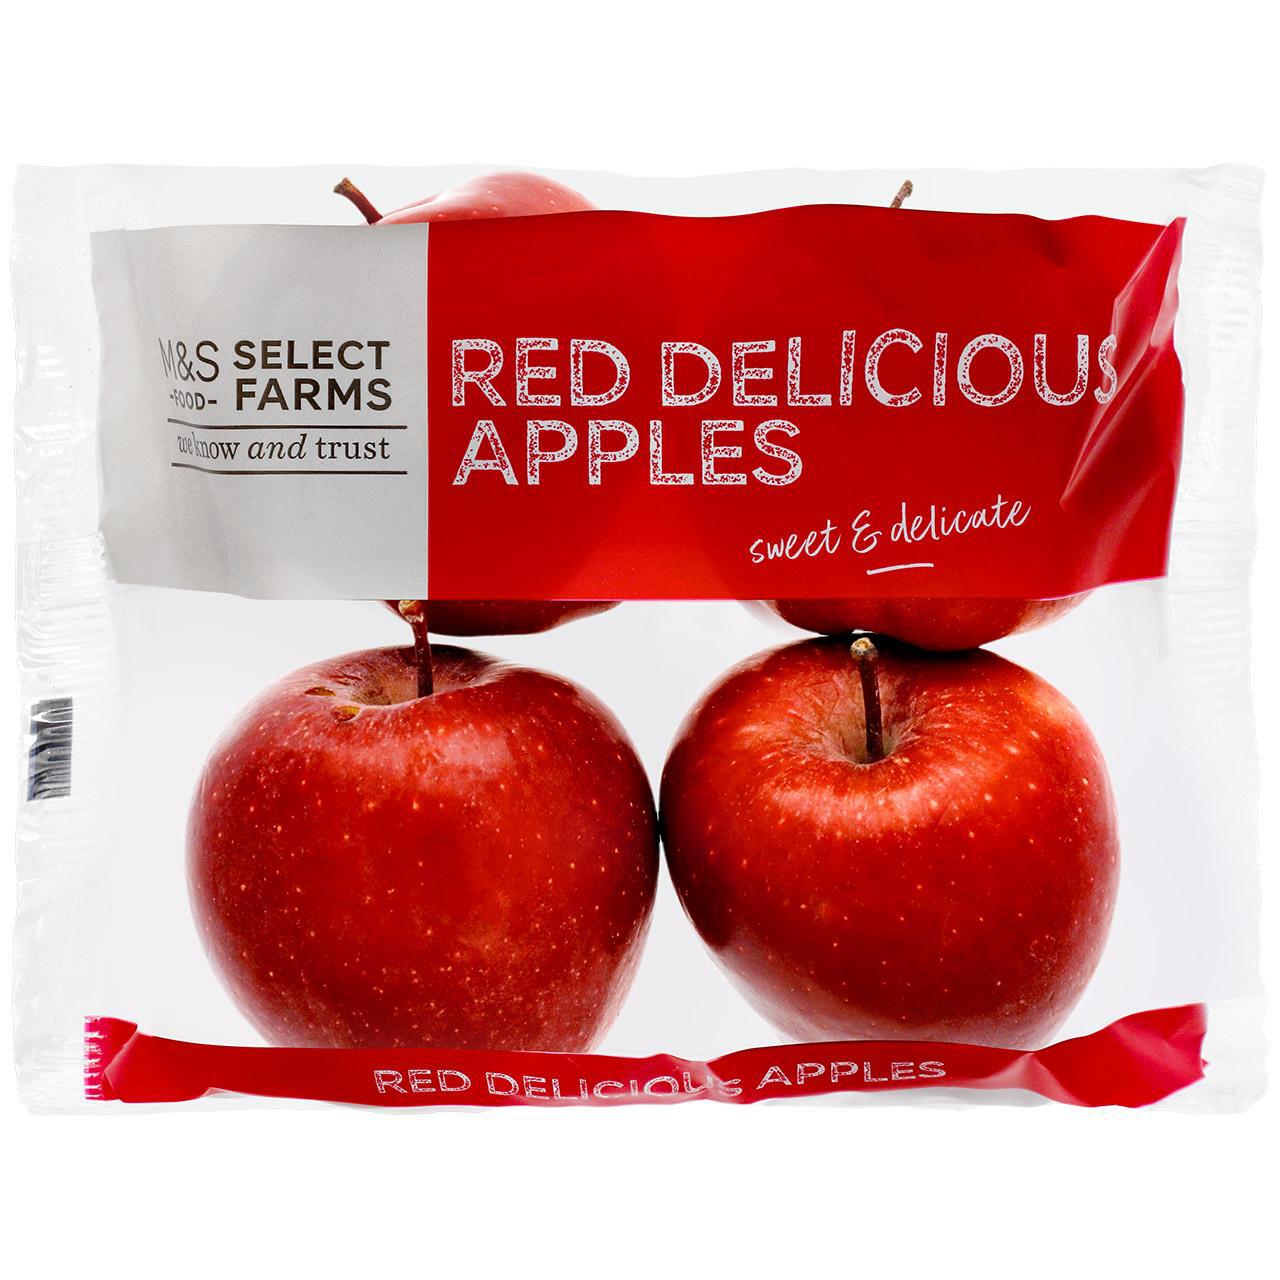 M&S Red Delicious Apples 4 per pack